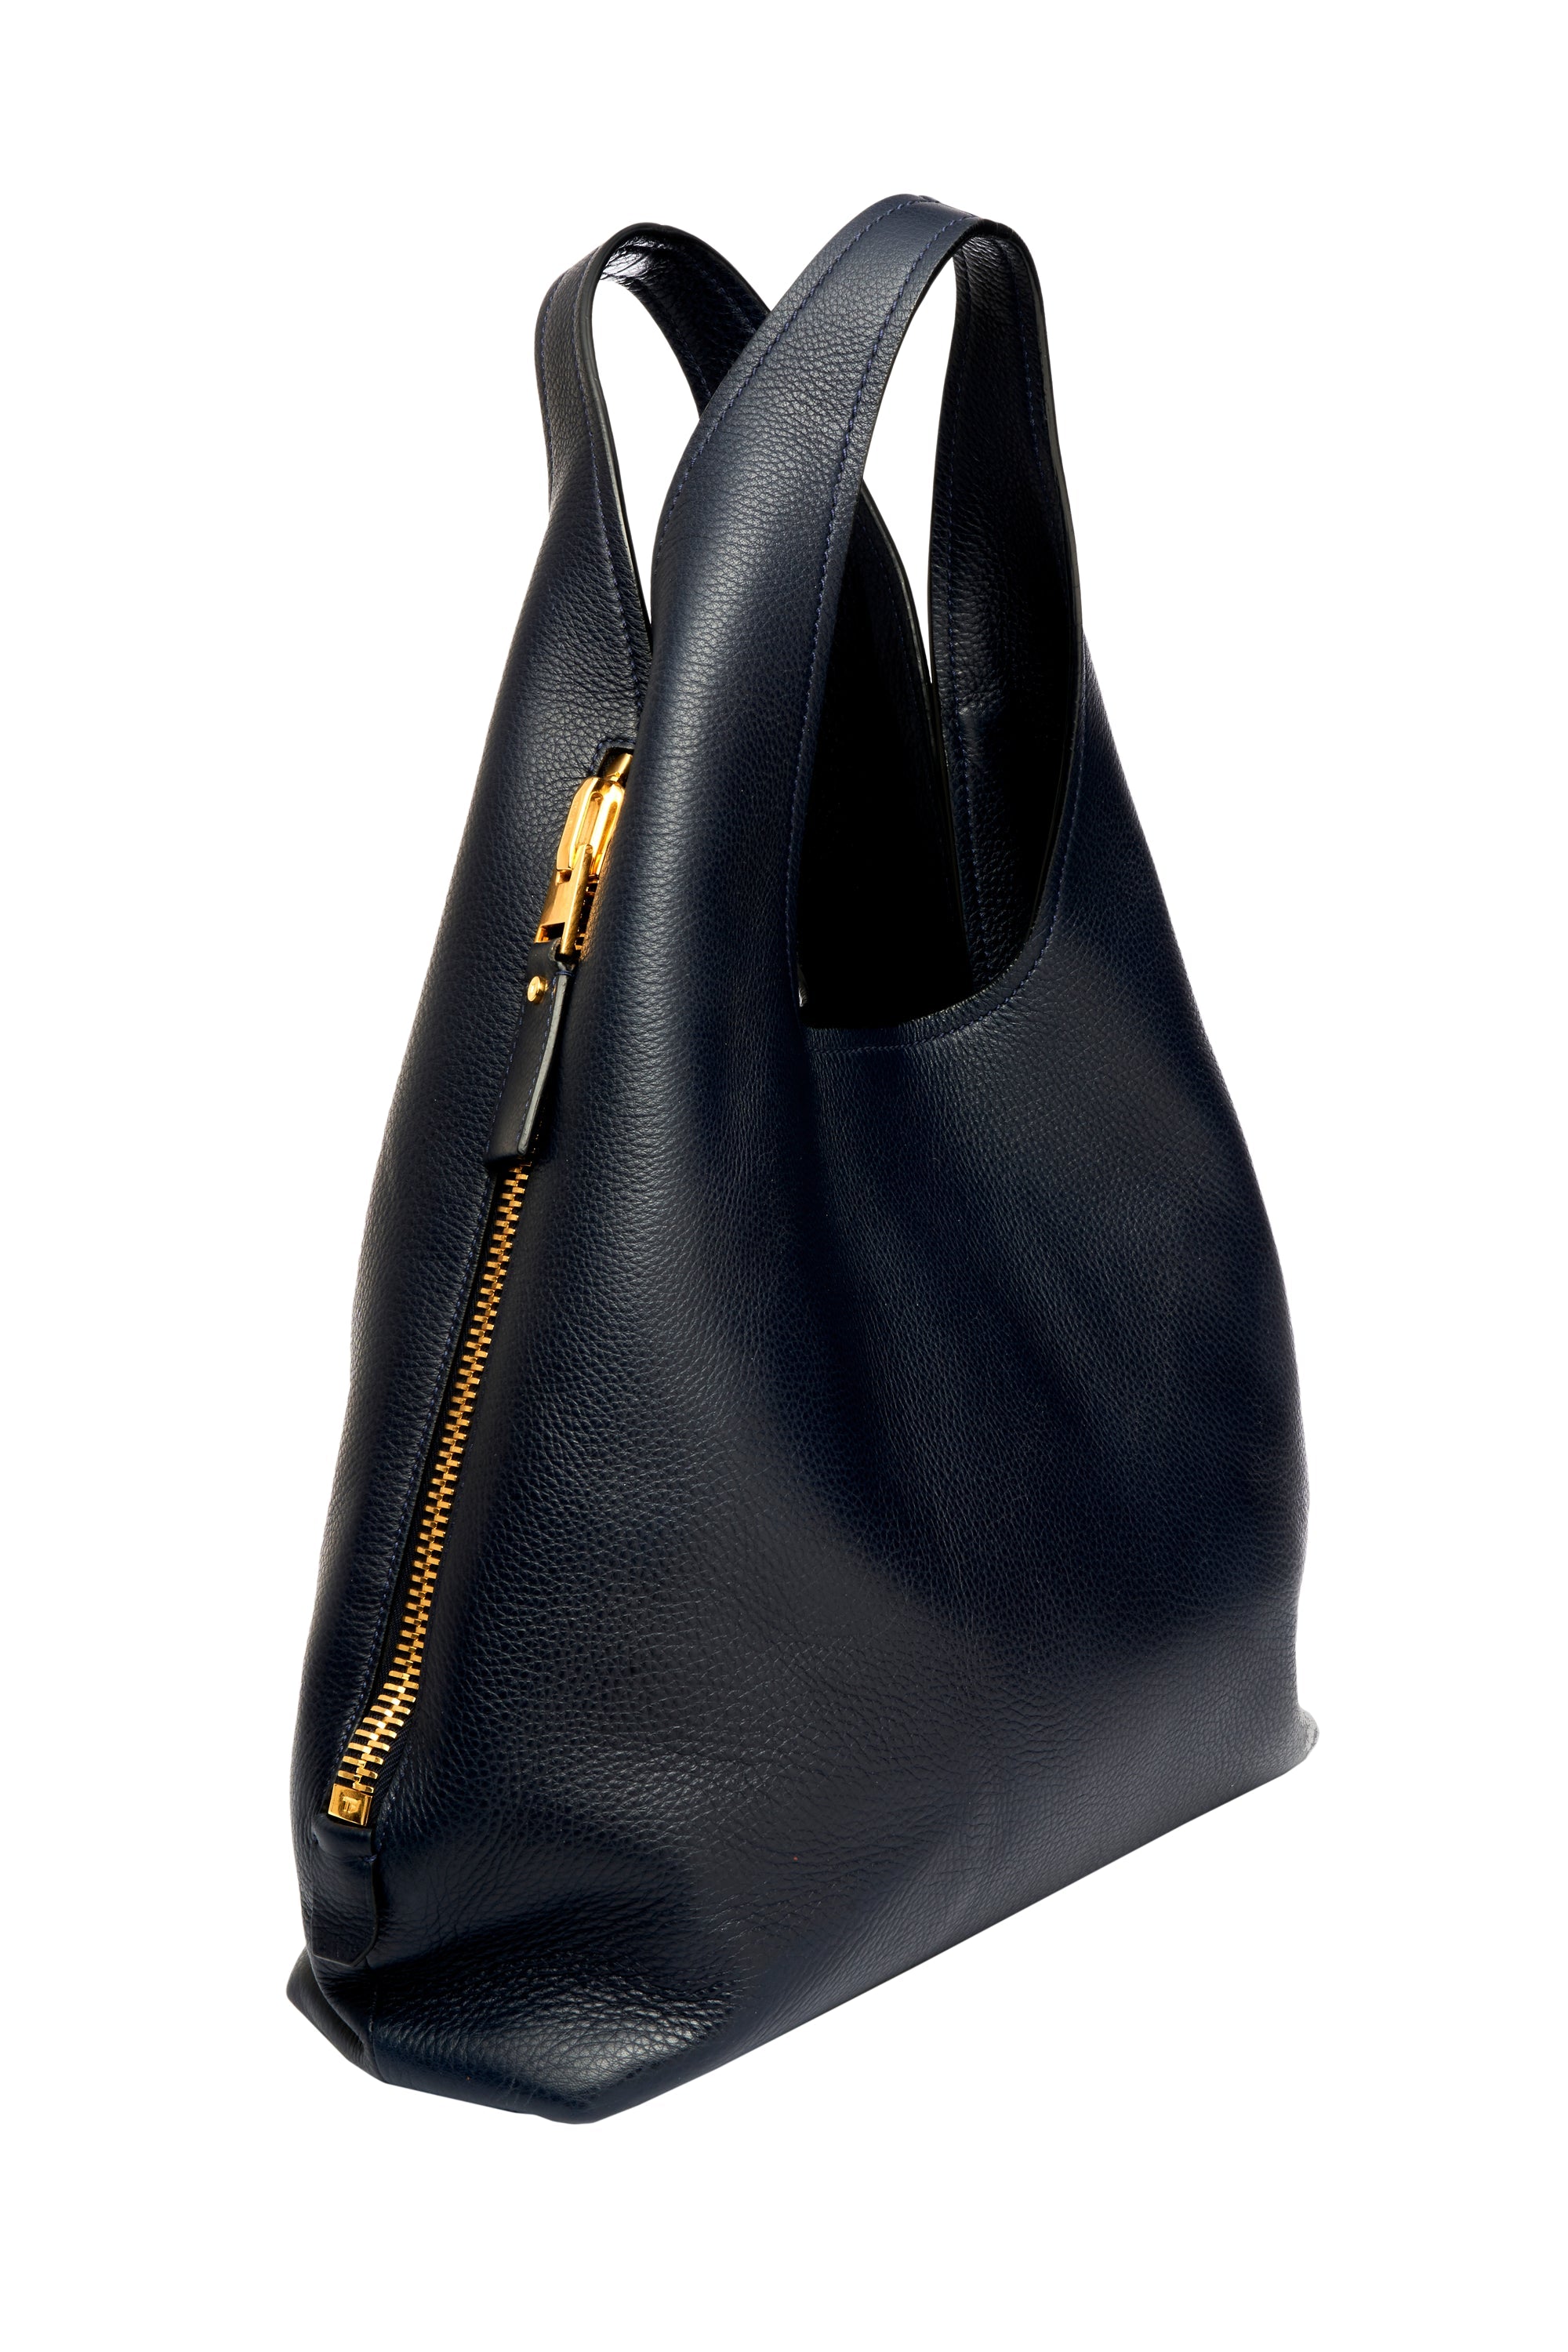 Tom Ford Navy and Gold Zipper Tote - Foxy Couture Carmel